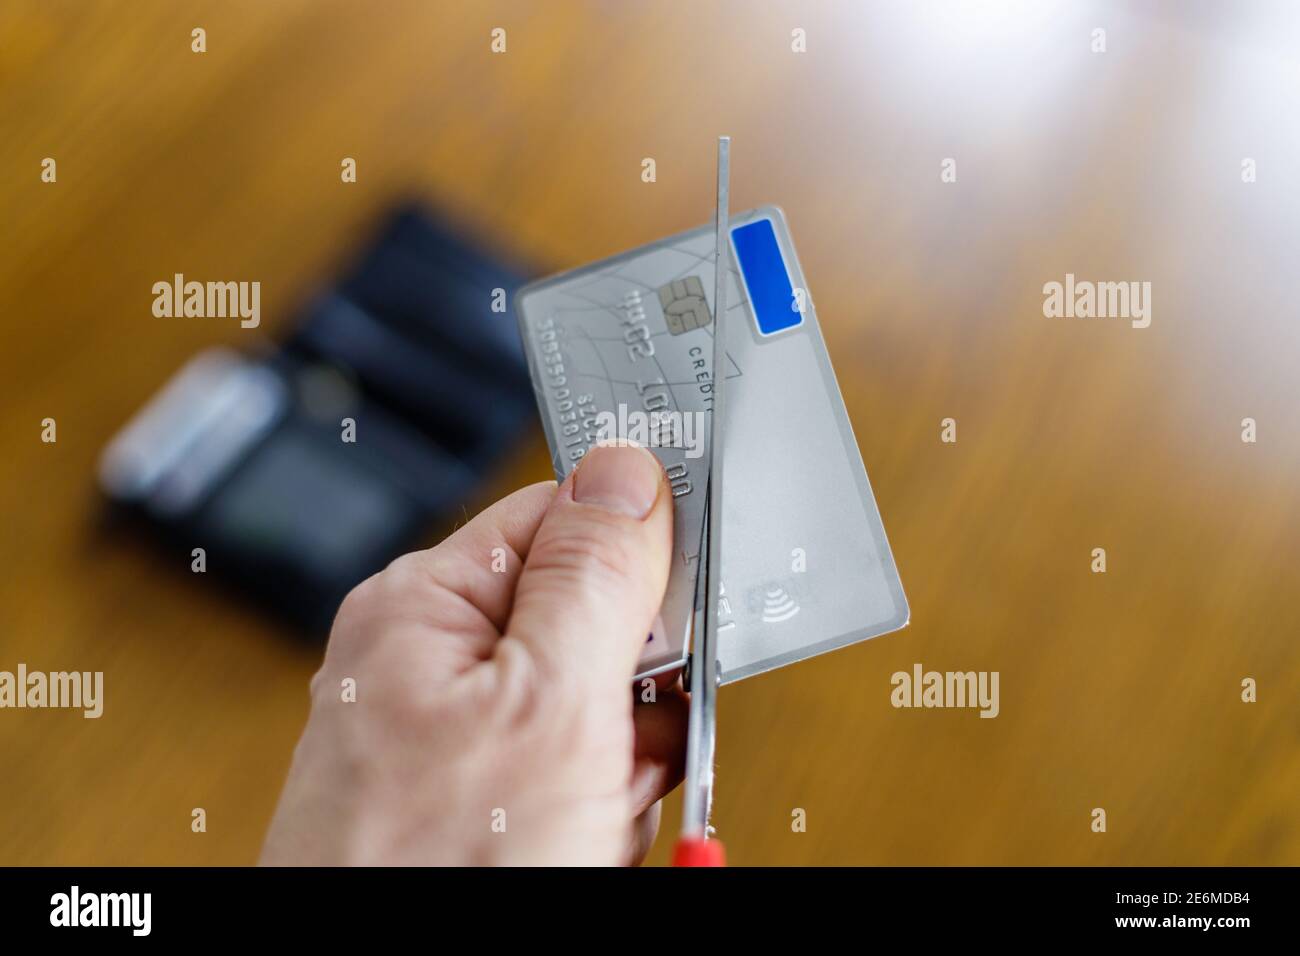 Irreversible destruction of a deactivated payment card by cutting with scissors Stock Photo